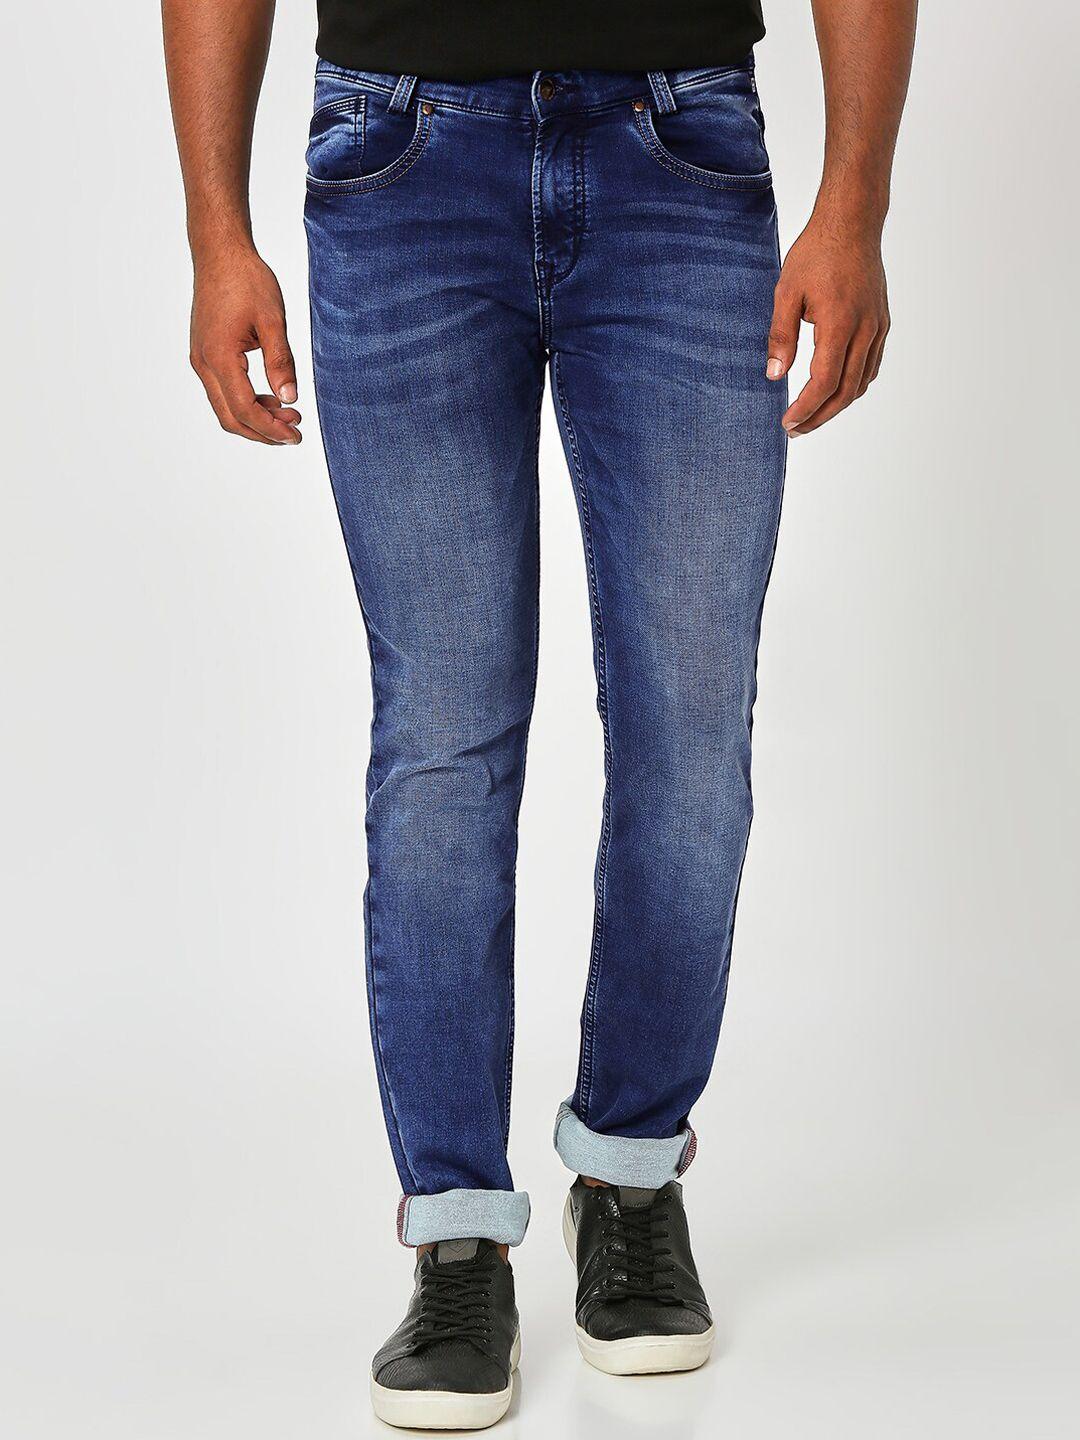 mufti-men-narrow-fit-heavy-fade-stretchable-jeans